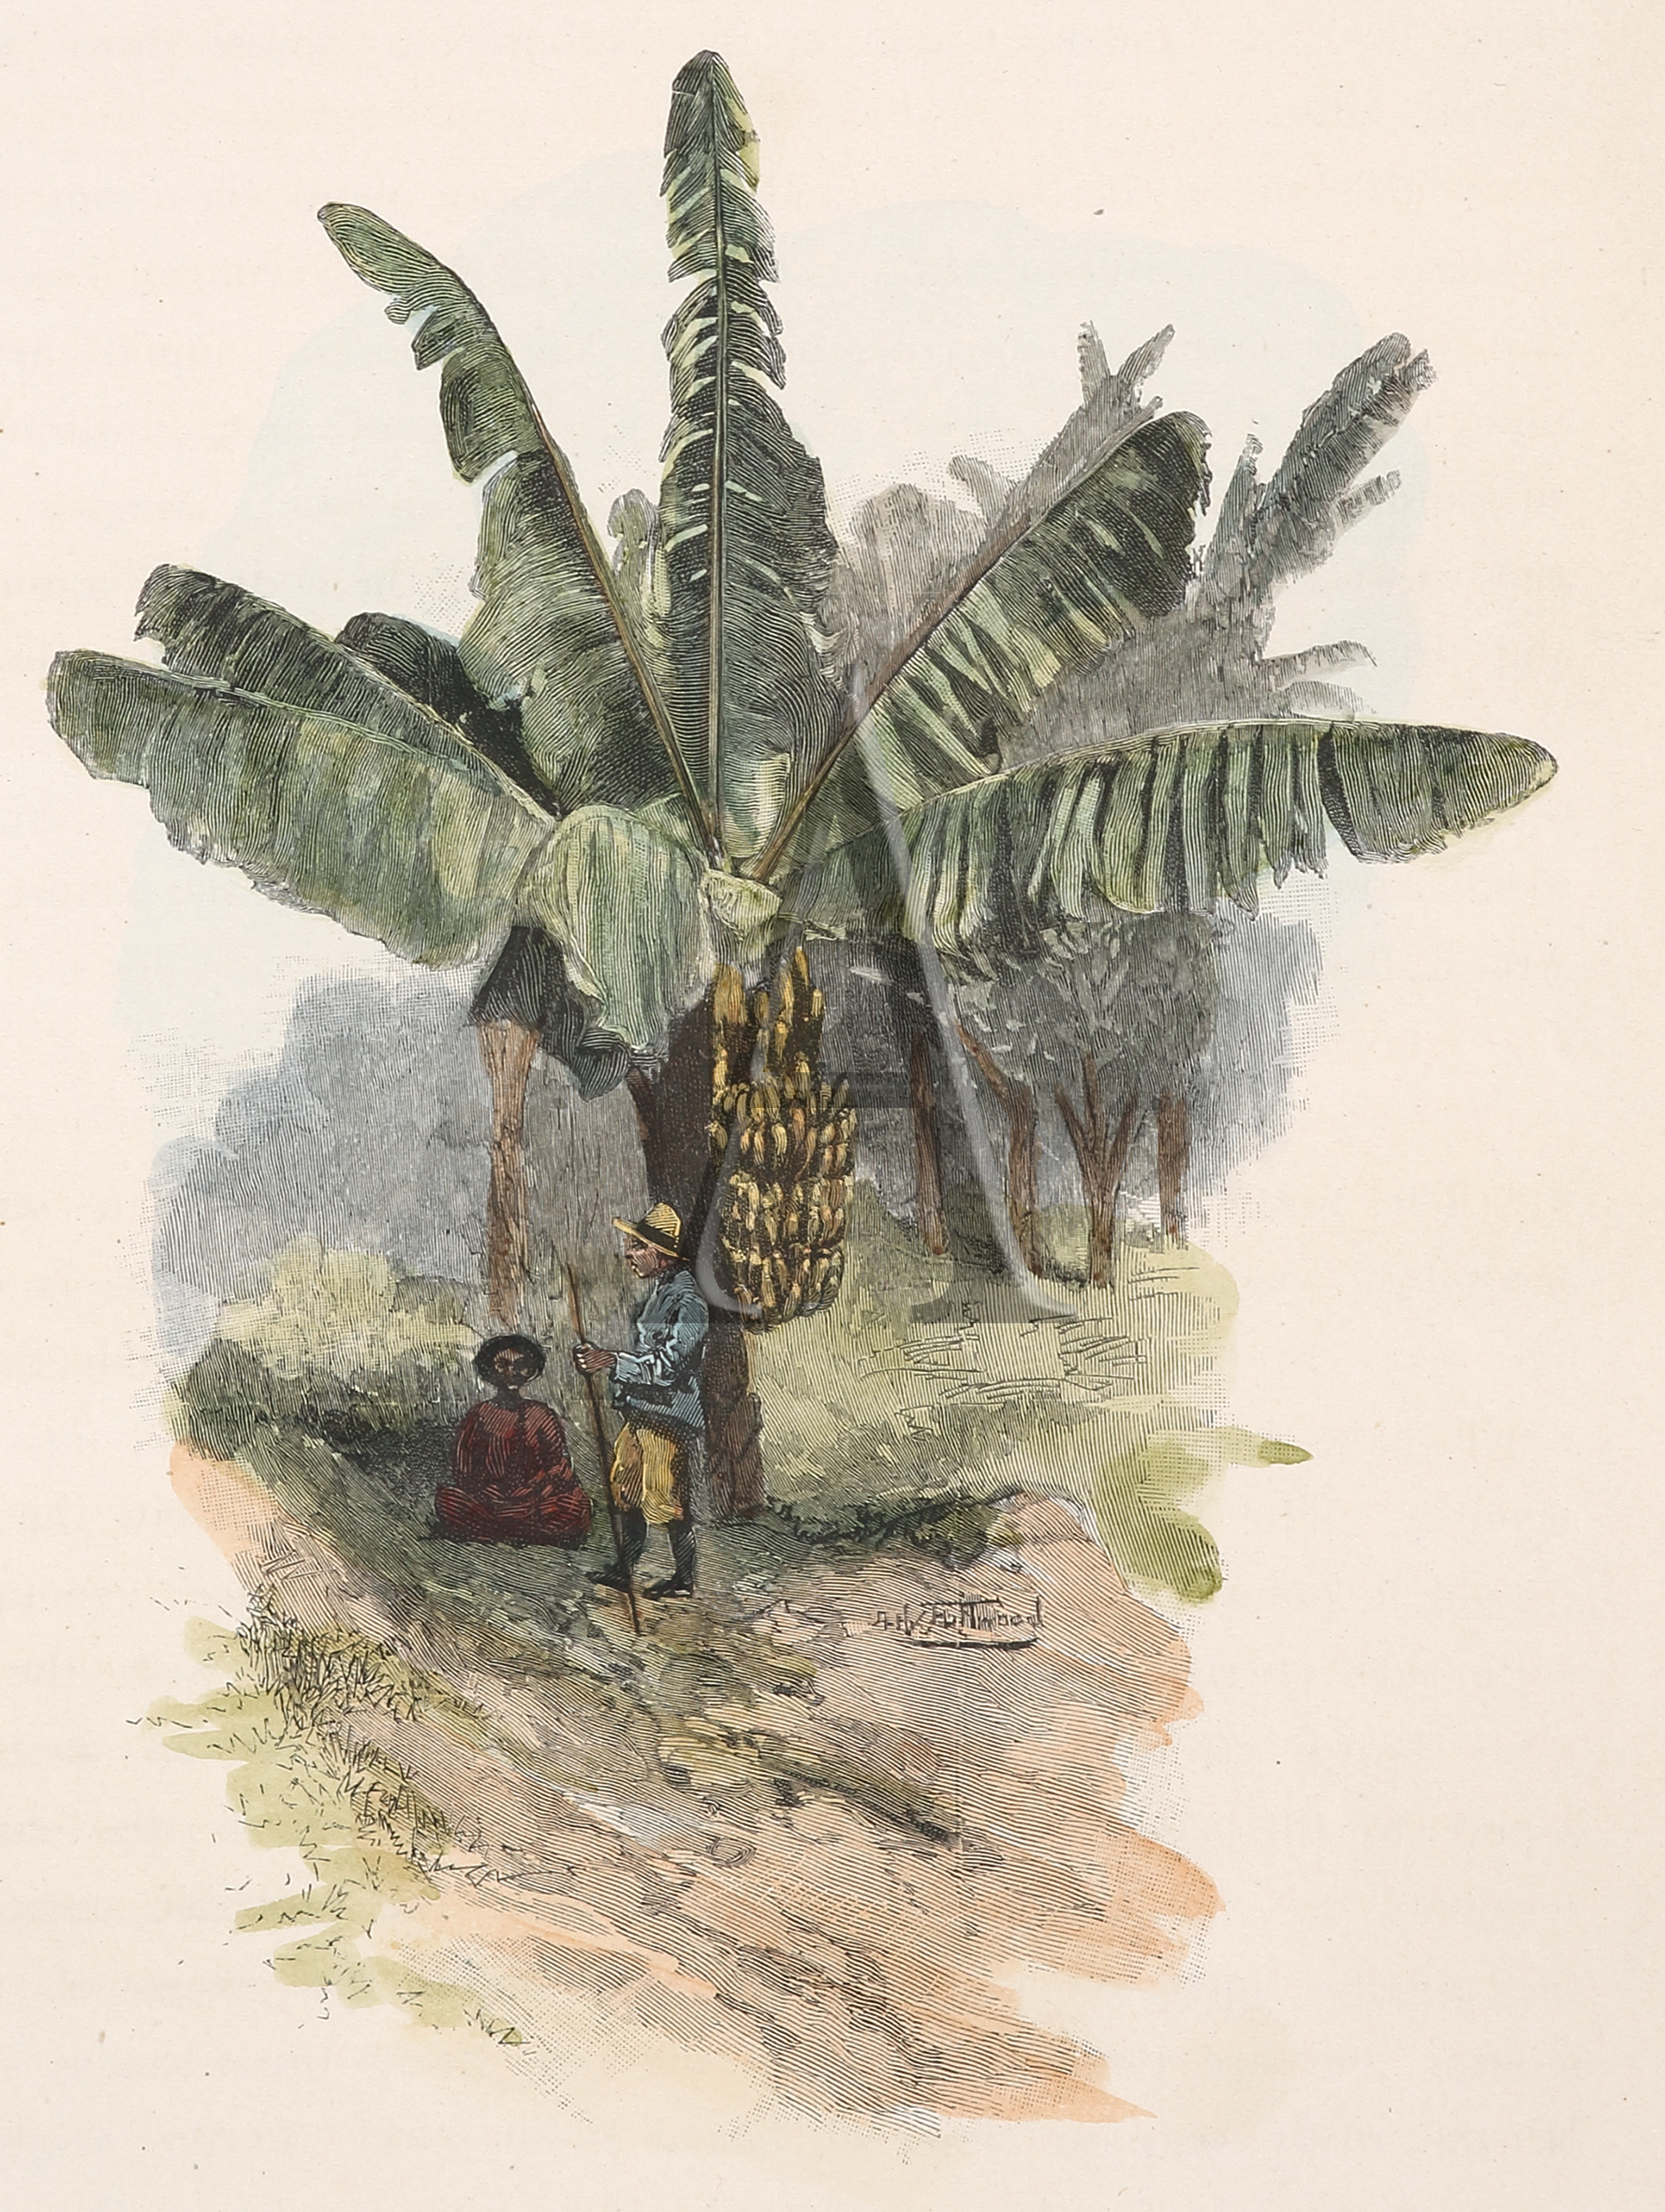 A Queensland Banana Tree - Antique Print from 1886